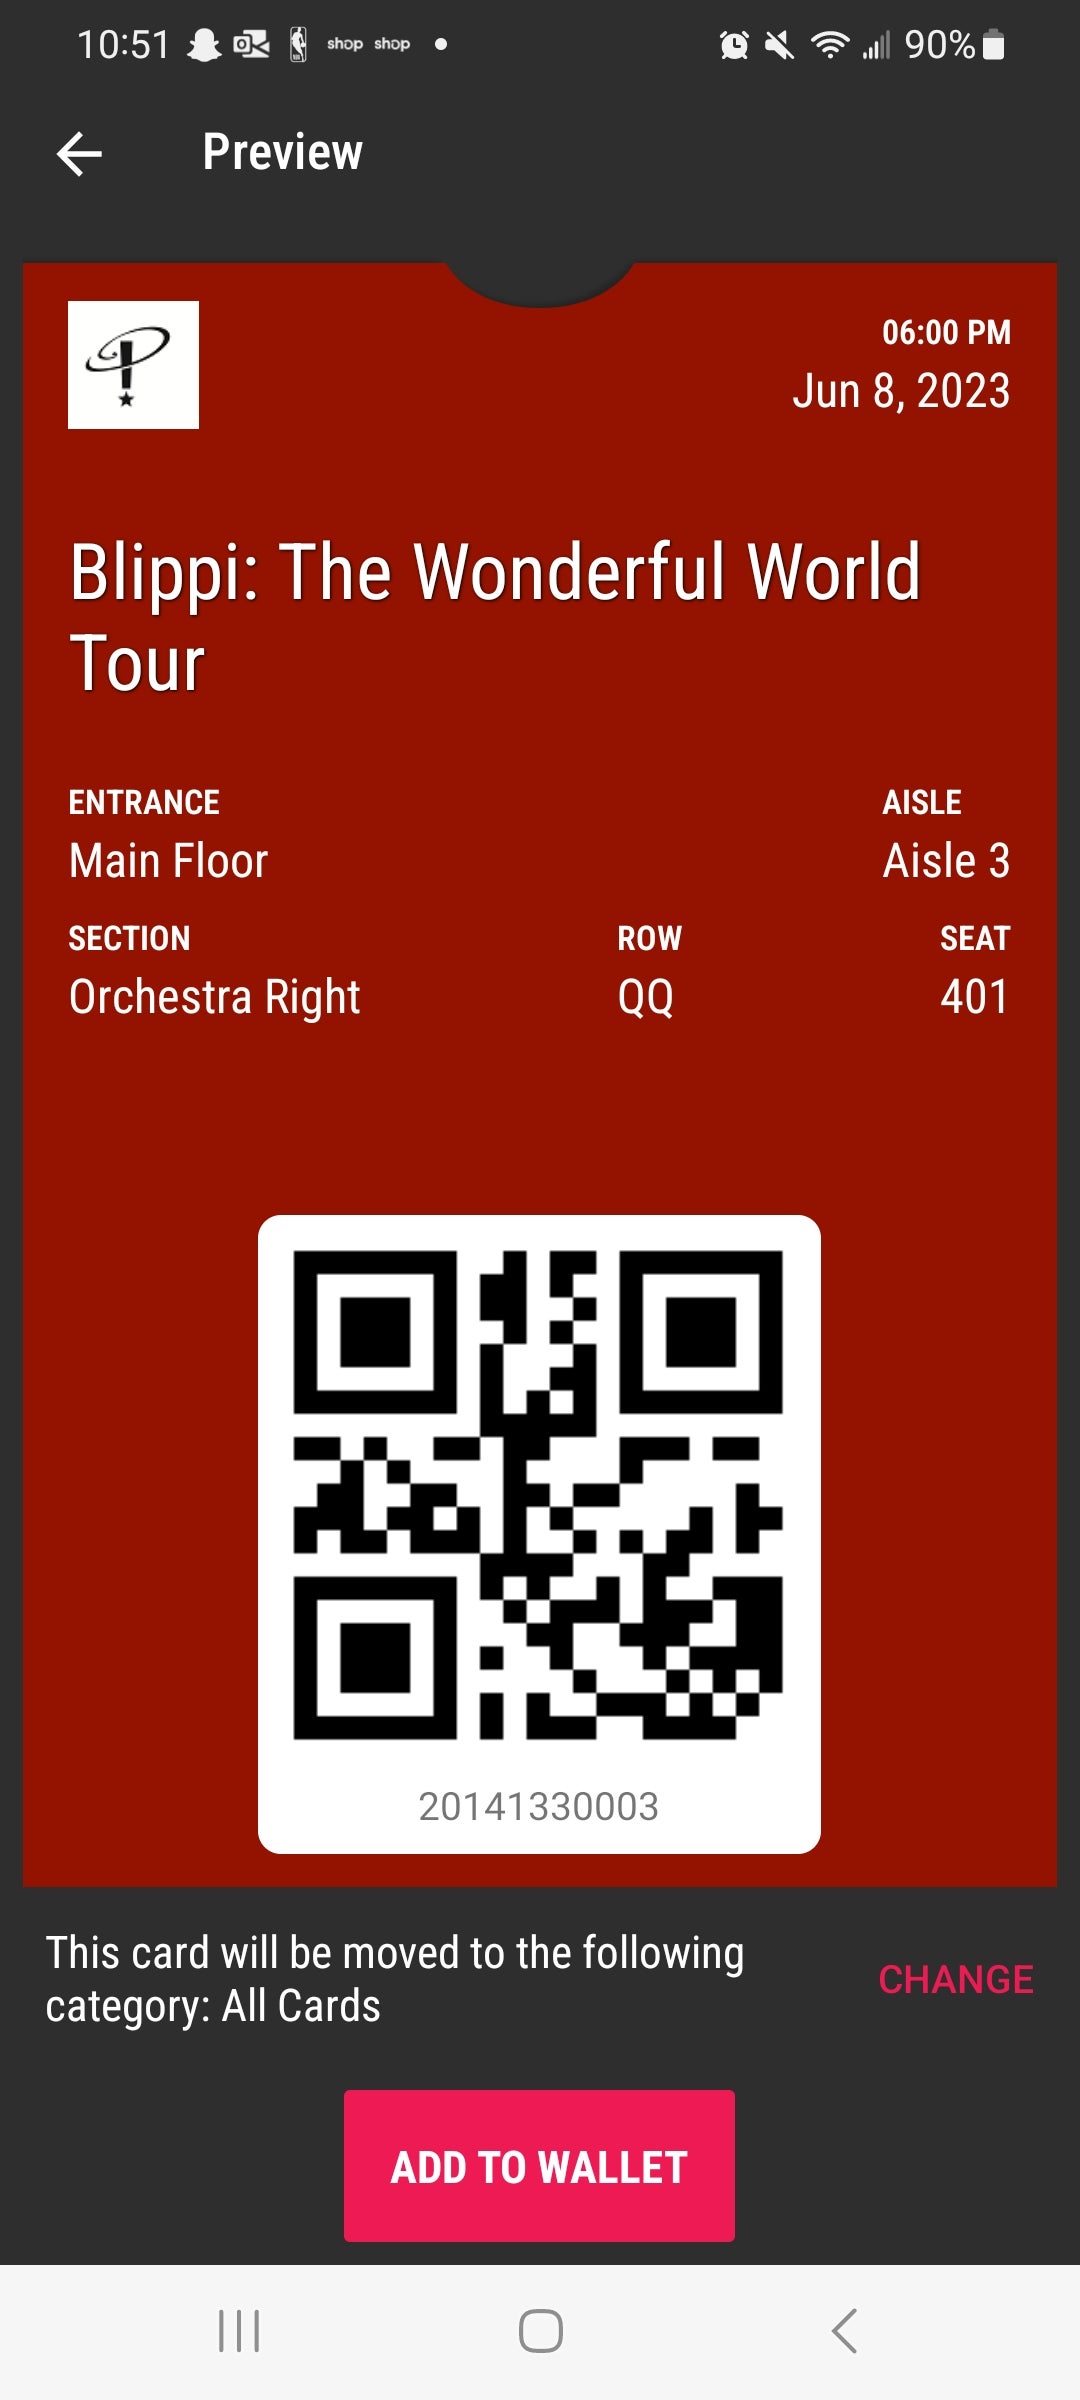 android mobile ticket ticket add to wallet.jpg